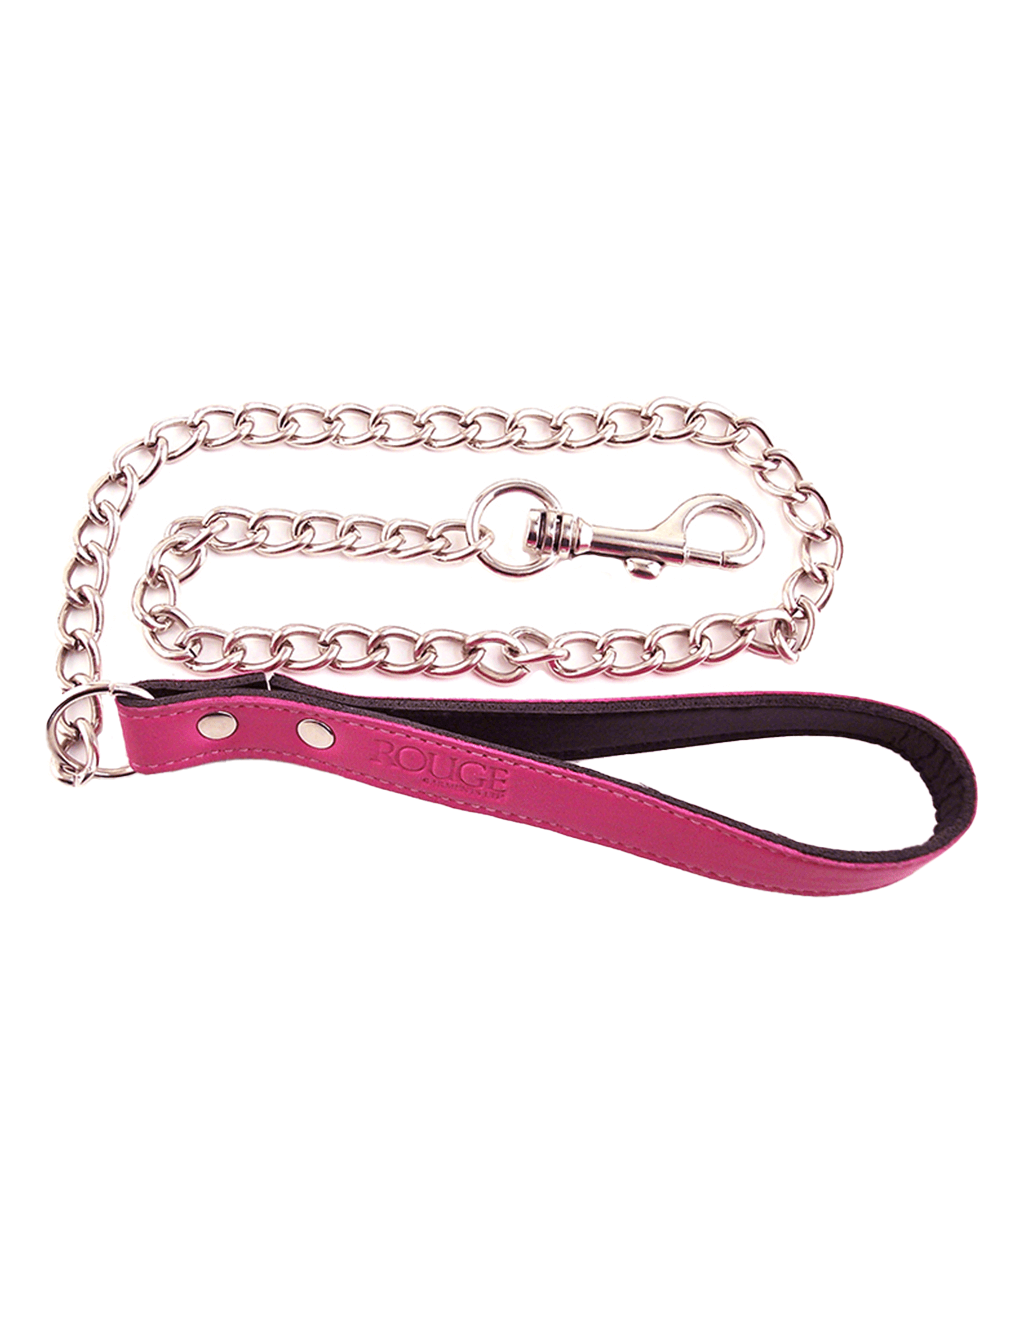 Rouge Leather Lead - Pink - Top View